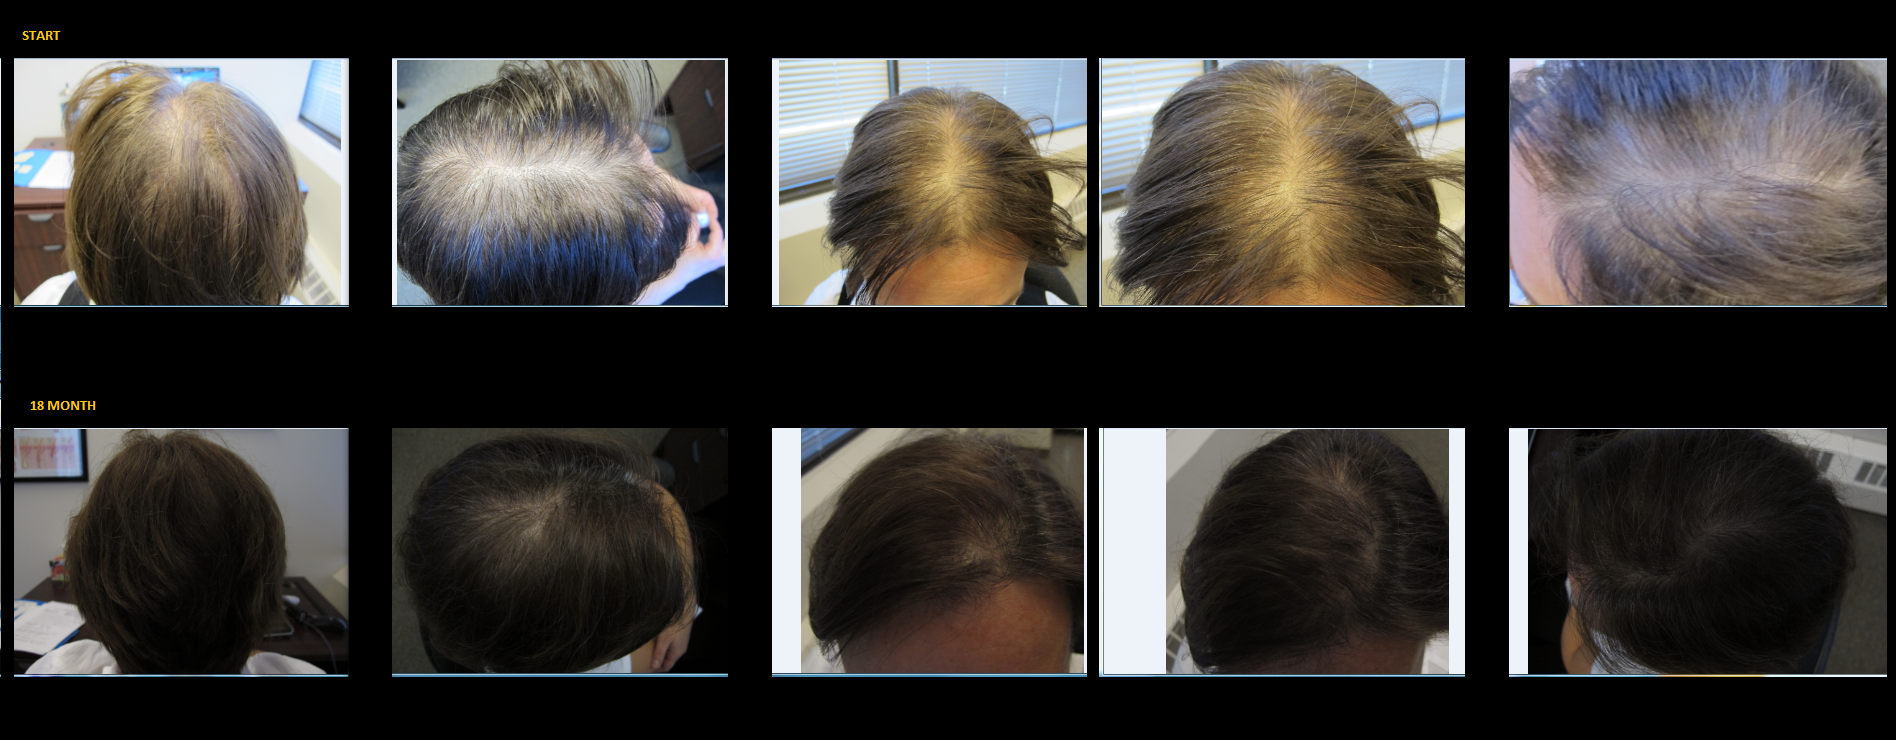 Laser Hair Restoration in Bristall, Leeds - The Cosmetic Room